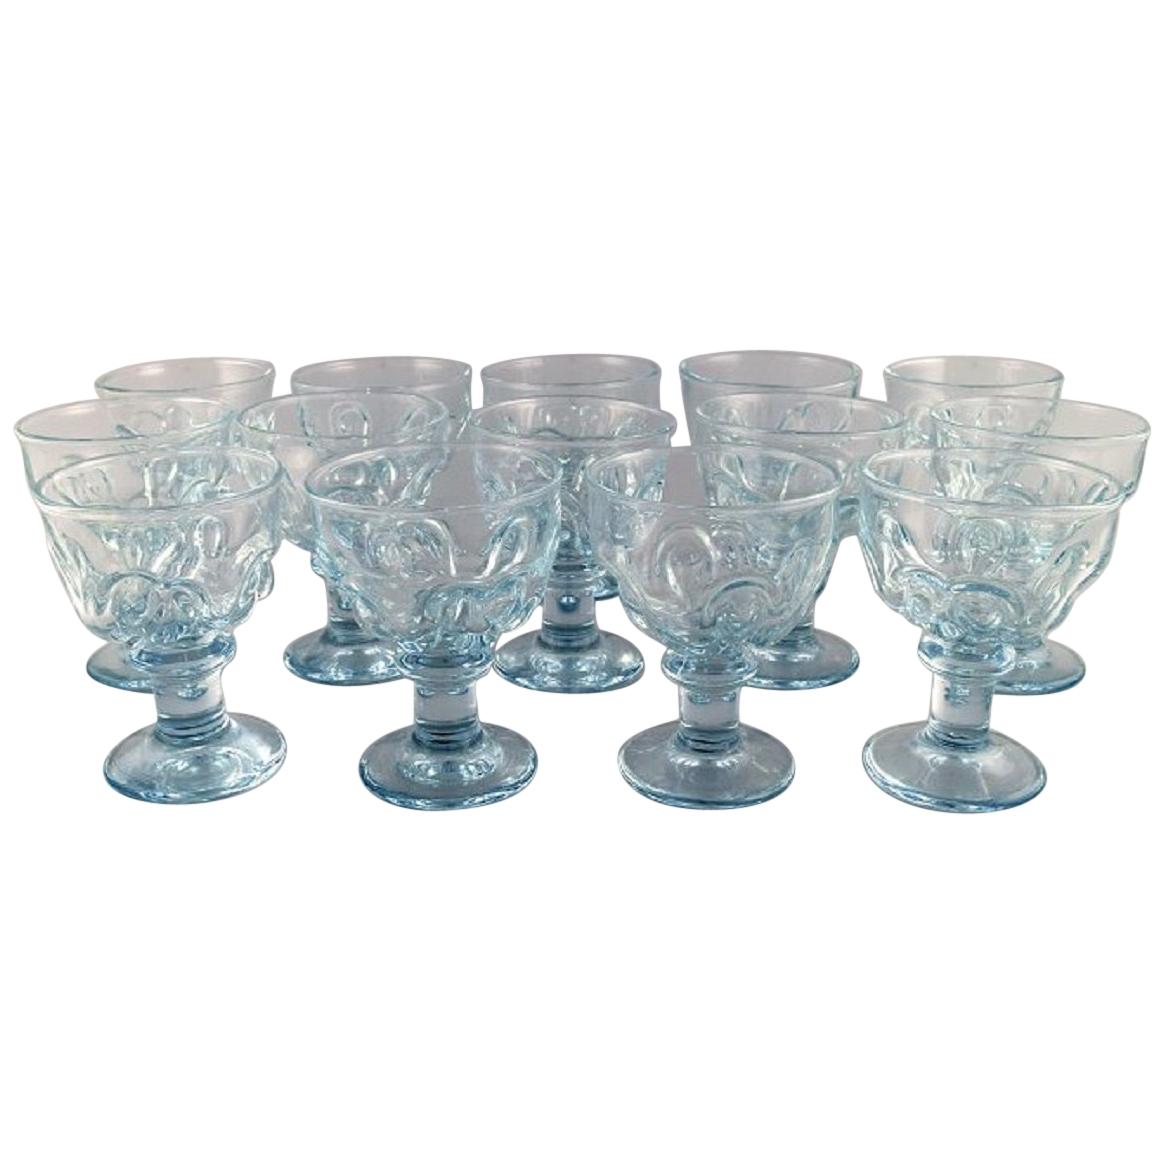 14 Large French Designer Glasses in Mouth Blown Art Glass, Mid-20th Century For Sale